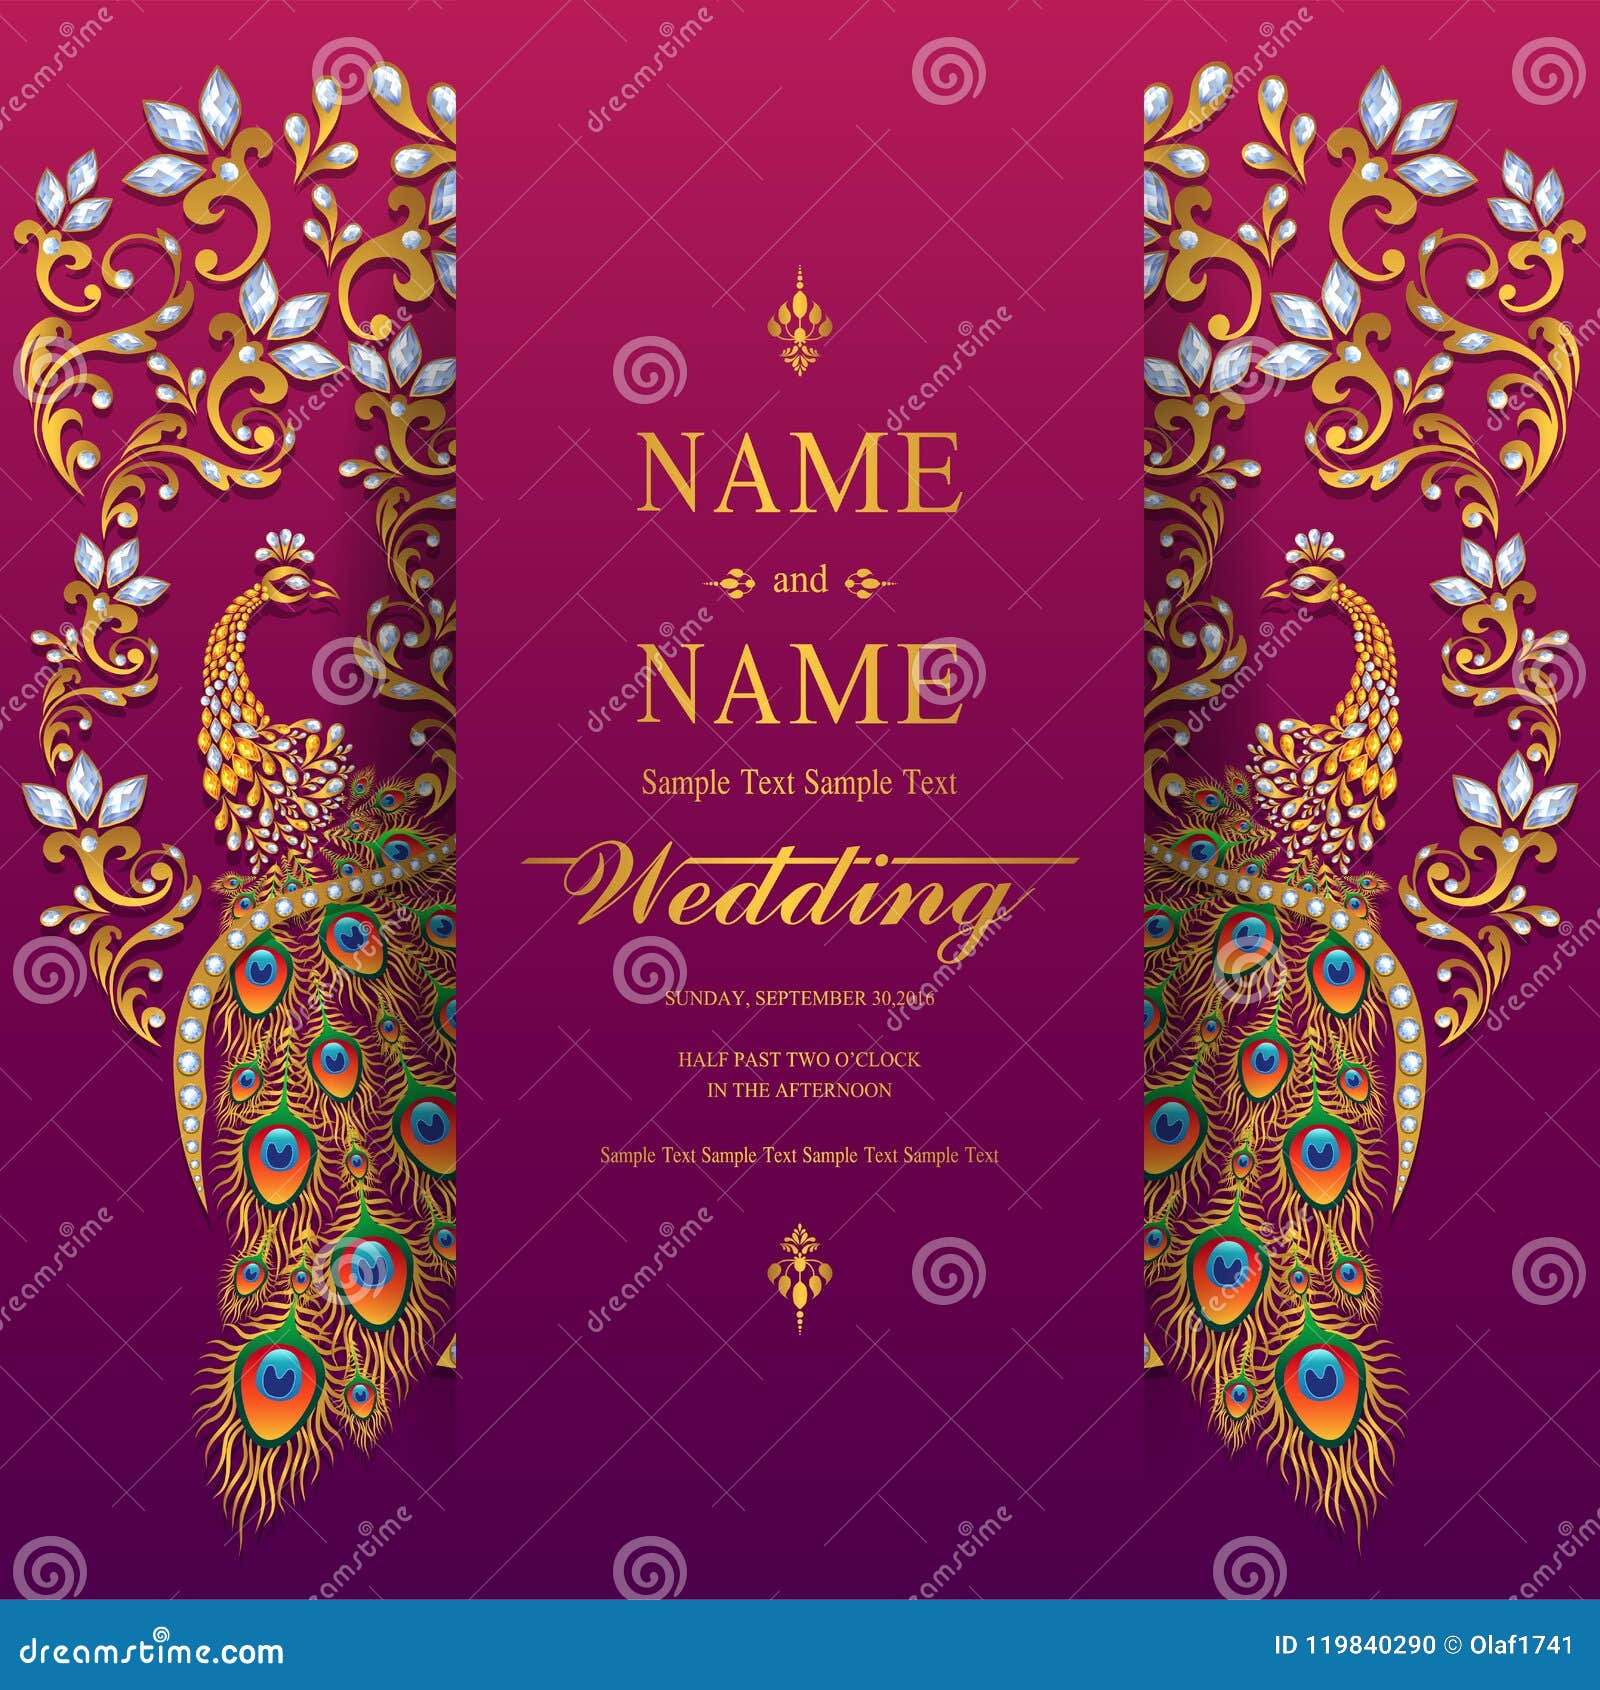 Wedding Invitation Card Templates . Stock Vector - Illustration of For Indian Wedding Cards Design Templates